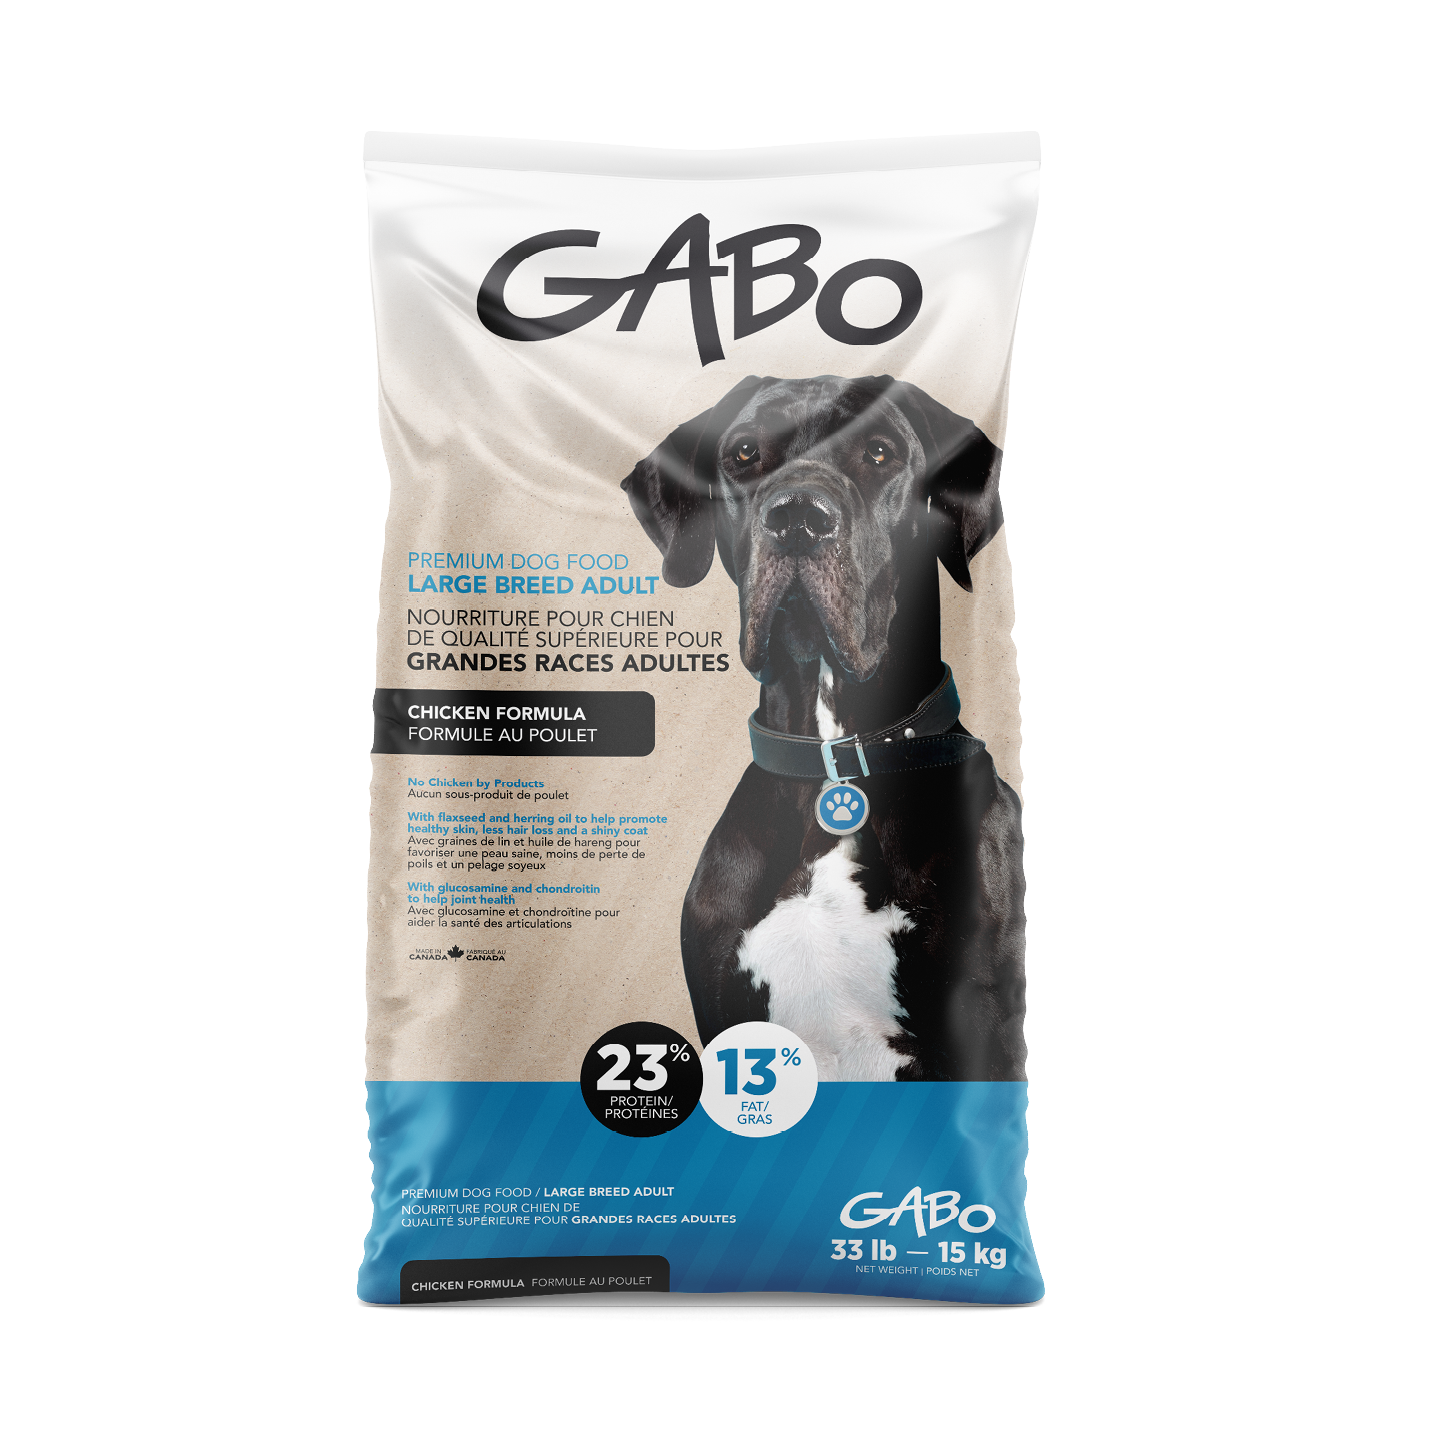 Gabo - Premium and Affordable Large Breed Dog Food